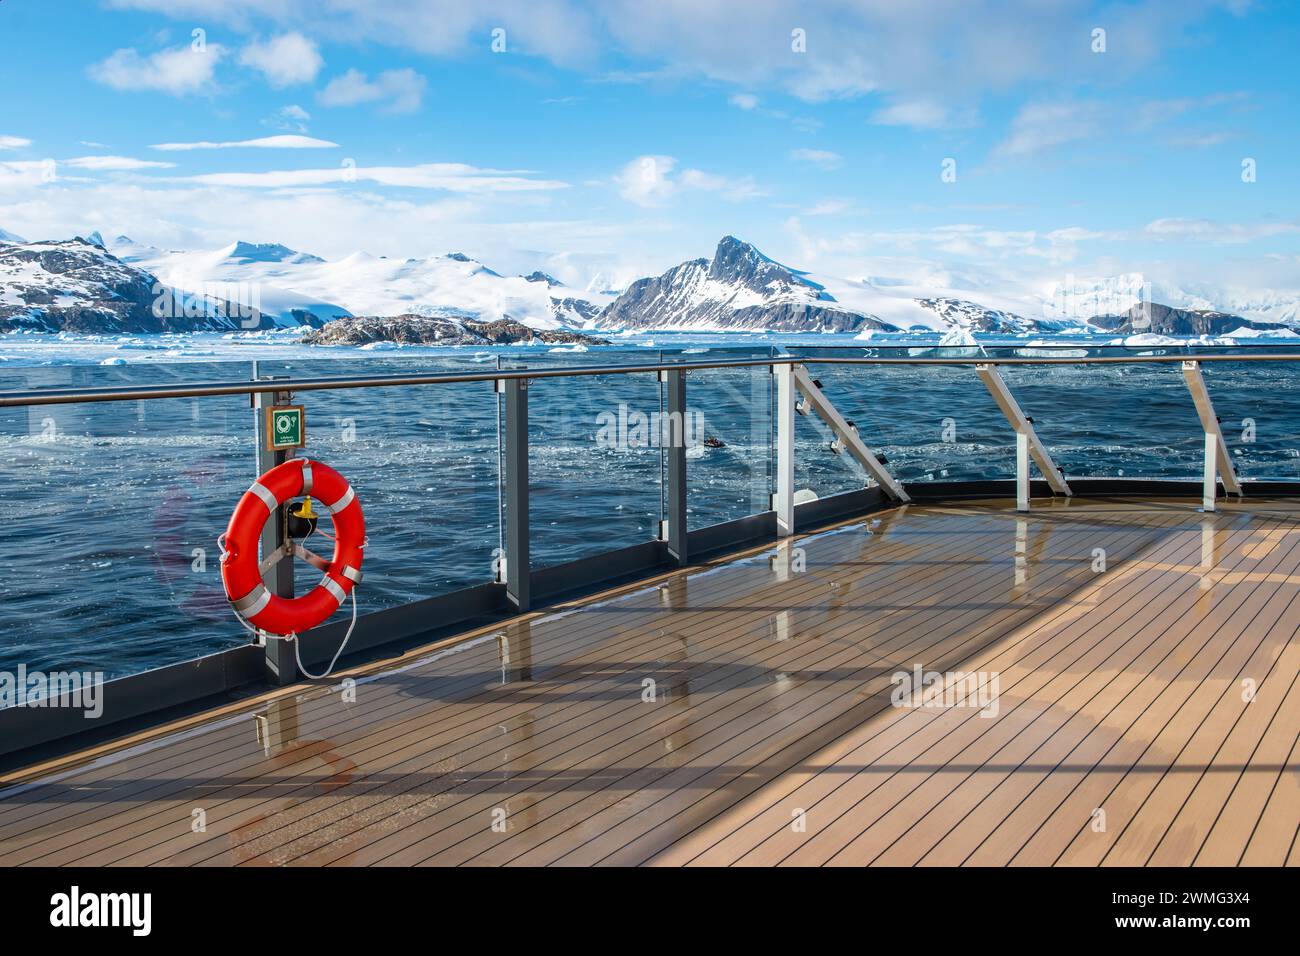 Cruise ship deck with railing in Antarctica. Snow mountain background. Winter cruise vacation concept. Stock Photo